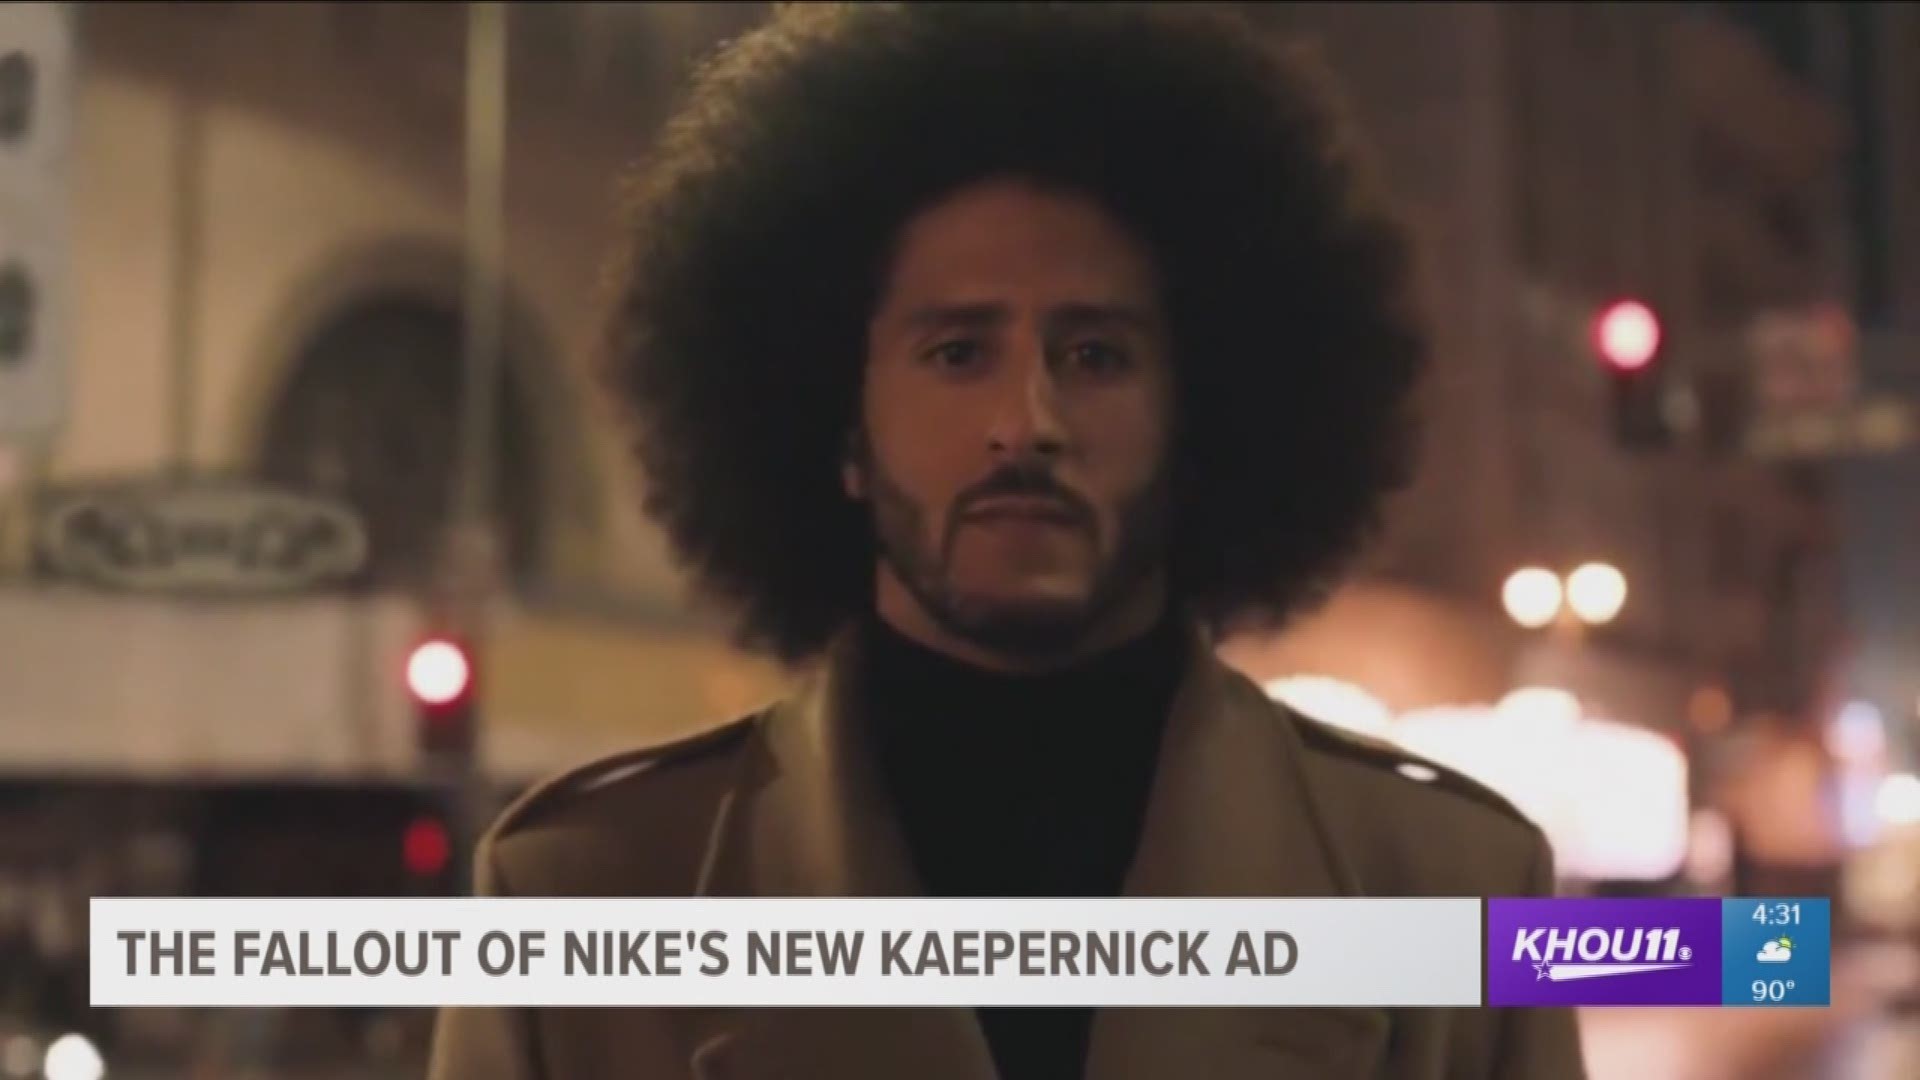 KHOU 11 political analyst Bob Stein breaks down the political implications of Nike's new ad featuring former San Francisco 49ers Colin Kaepernick.